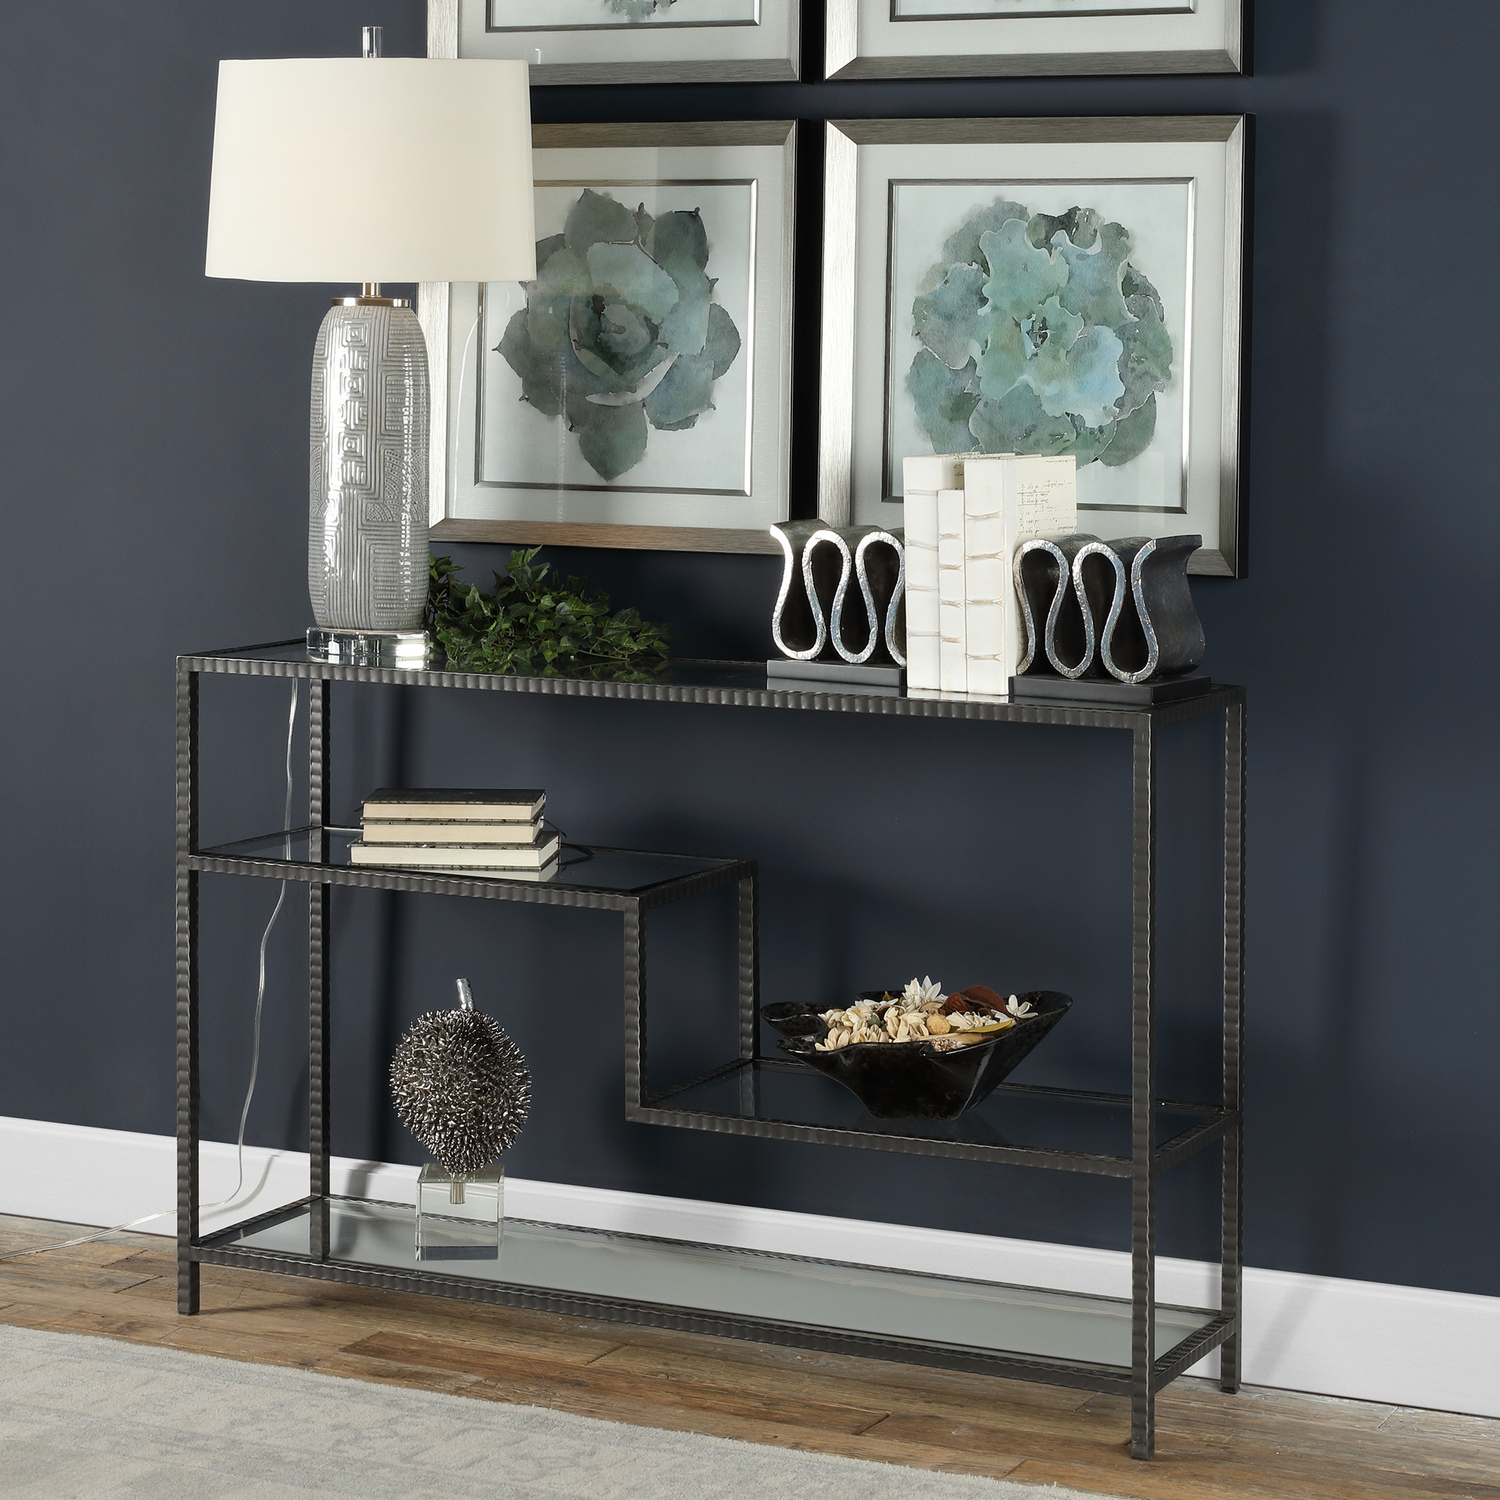 modern table design Uttermost  Console & Sofa Tables Industrial Inspired Function With Multi-level Display Shelves, Featuring Ribbed Iron Finished In An Aged Gunmetal With A Light Rust Patina. Shelves Are Clear Tempered Glass.